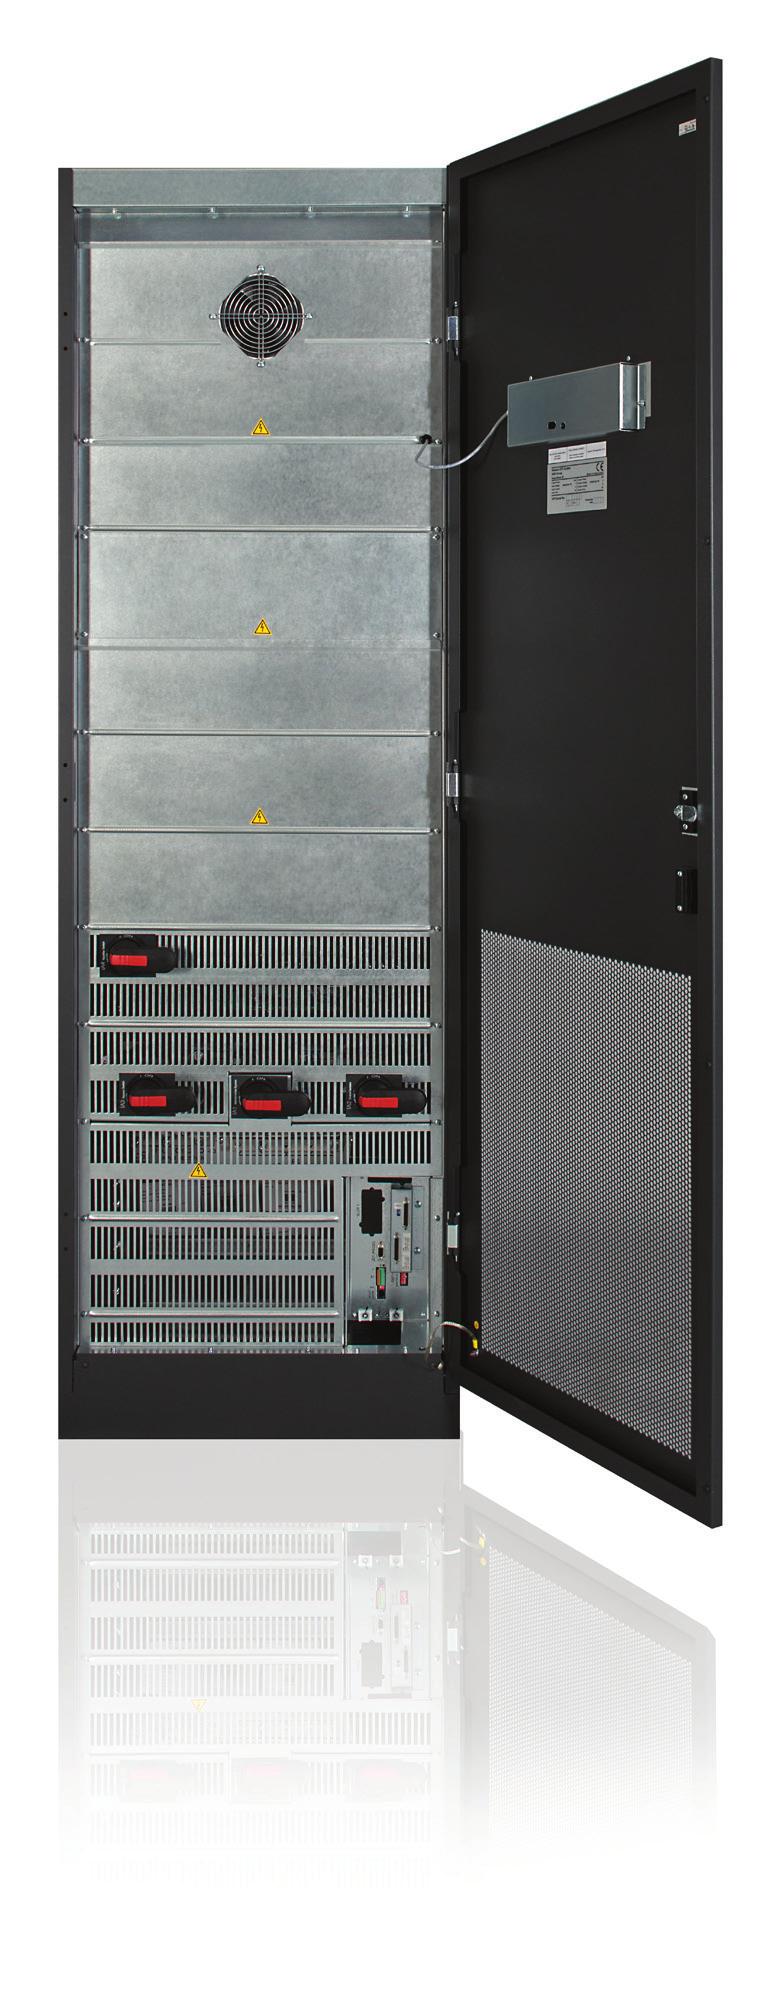 Easily scalable for capacity and redundancy Up to 10 units can be configured in parallel to provide over a megawatt of UPS power or redundant backup.